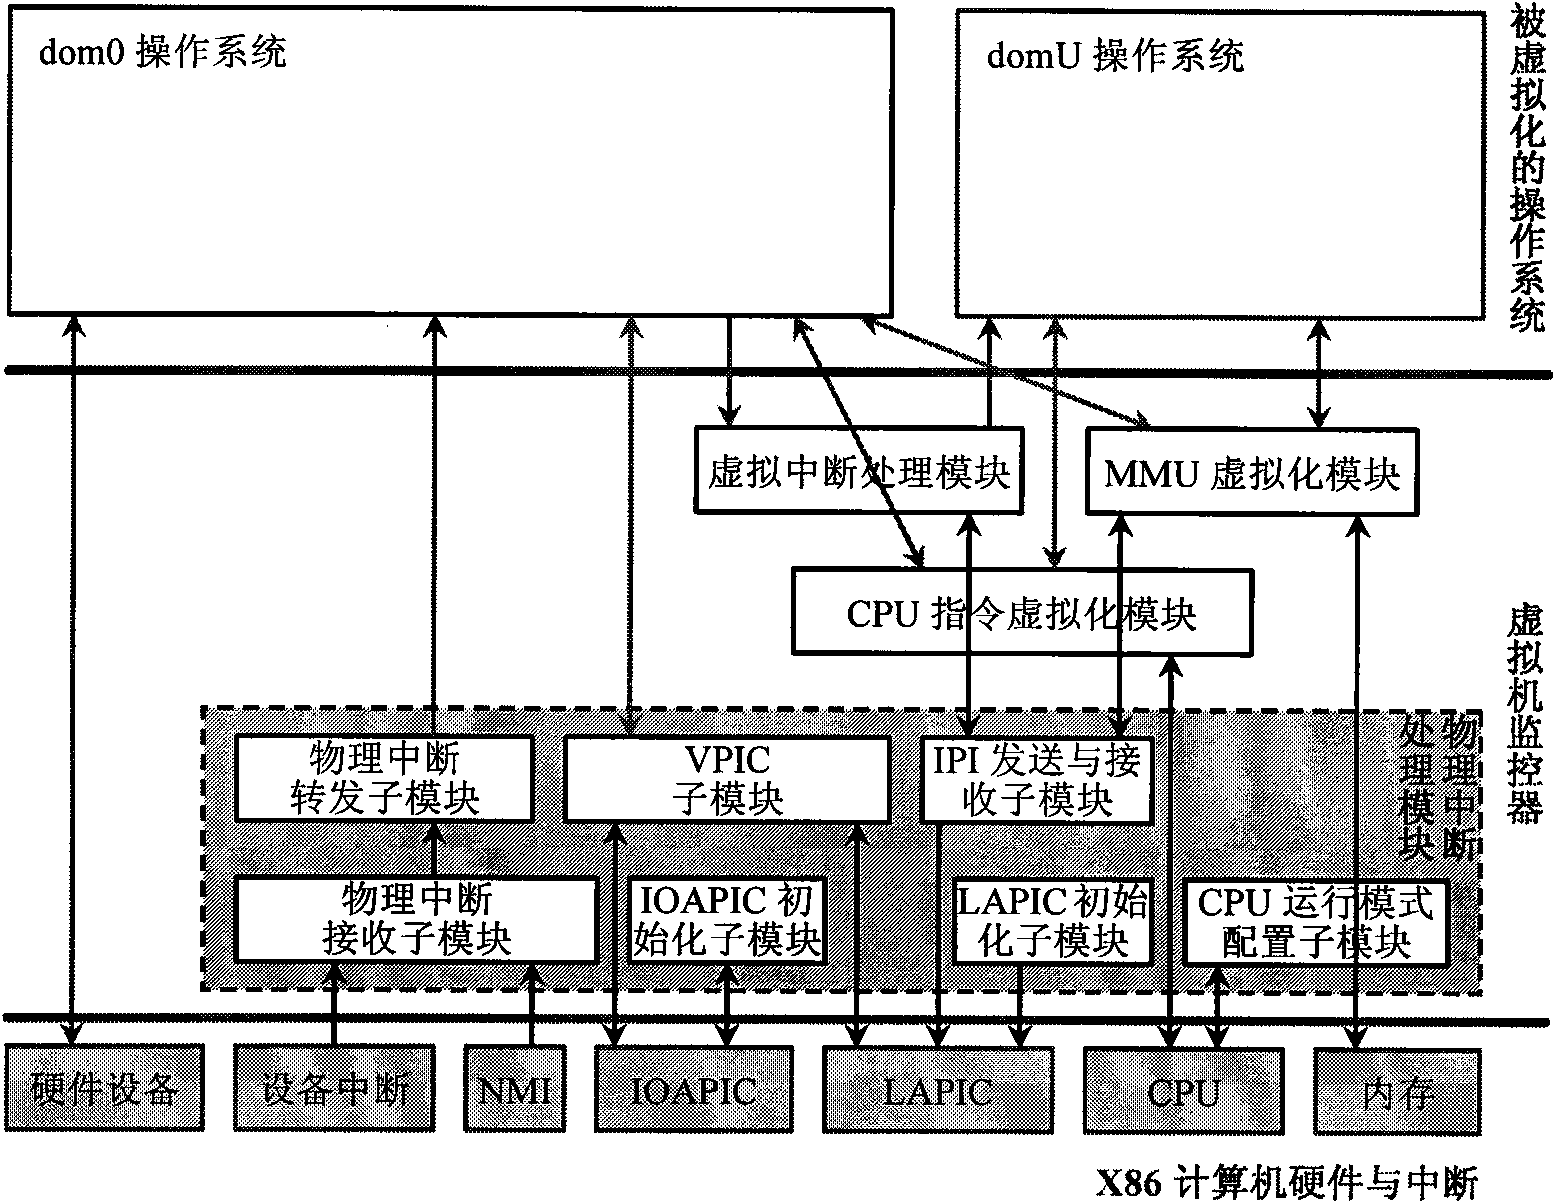 Virtual physical interrupt processing method of X86 computer